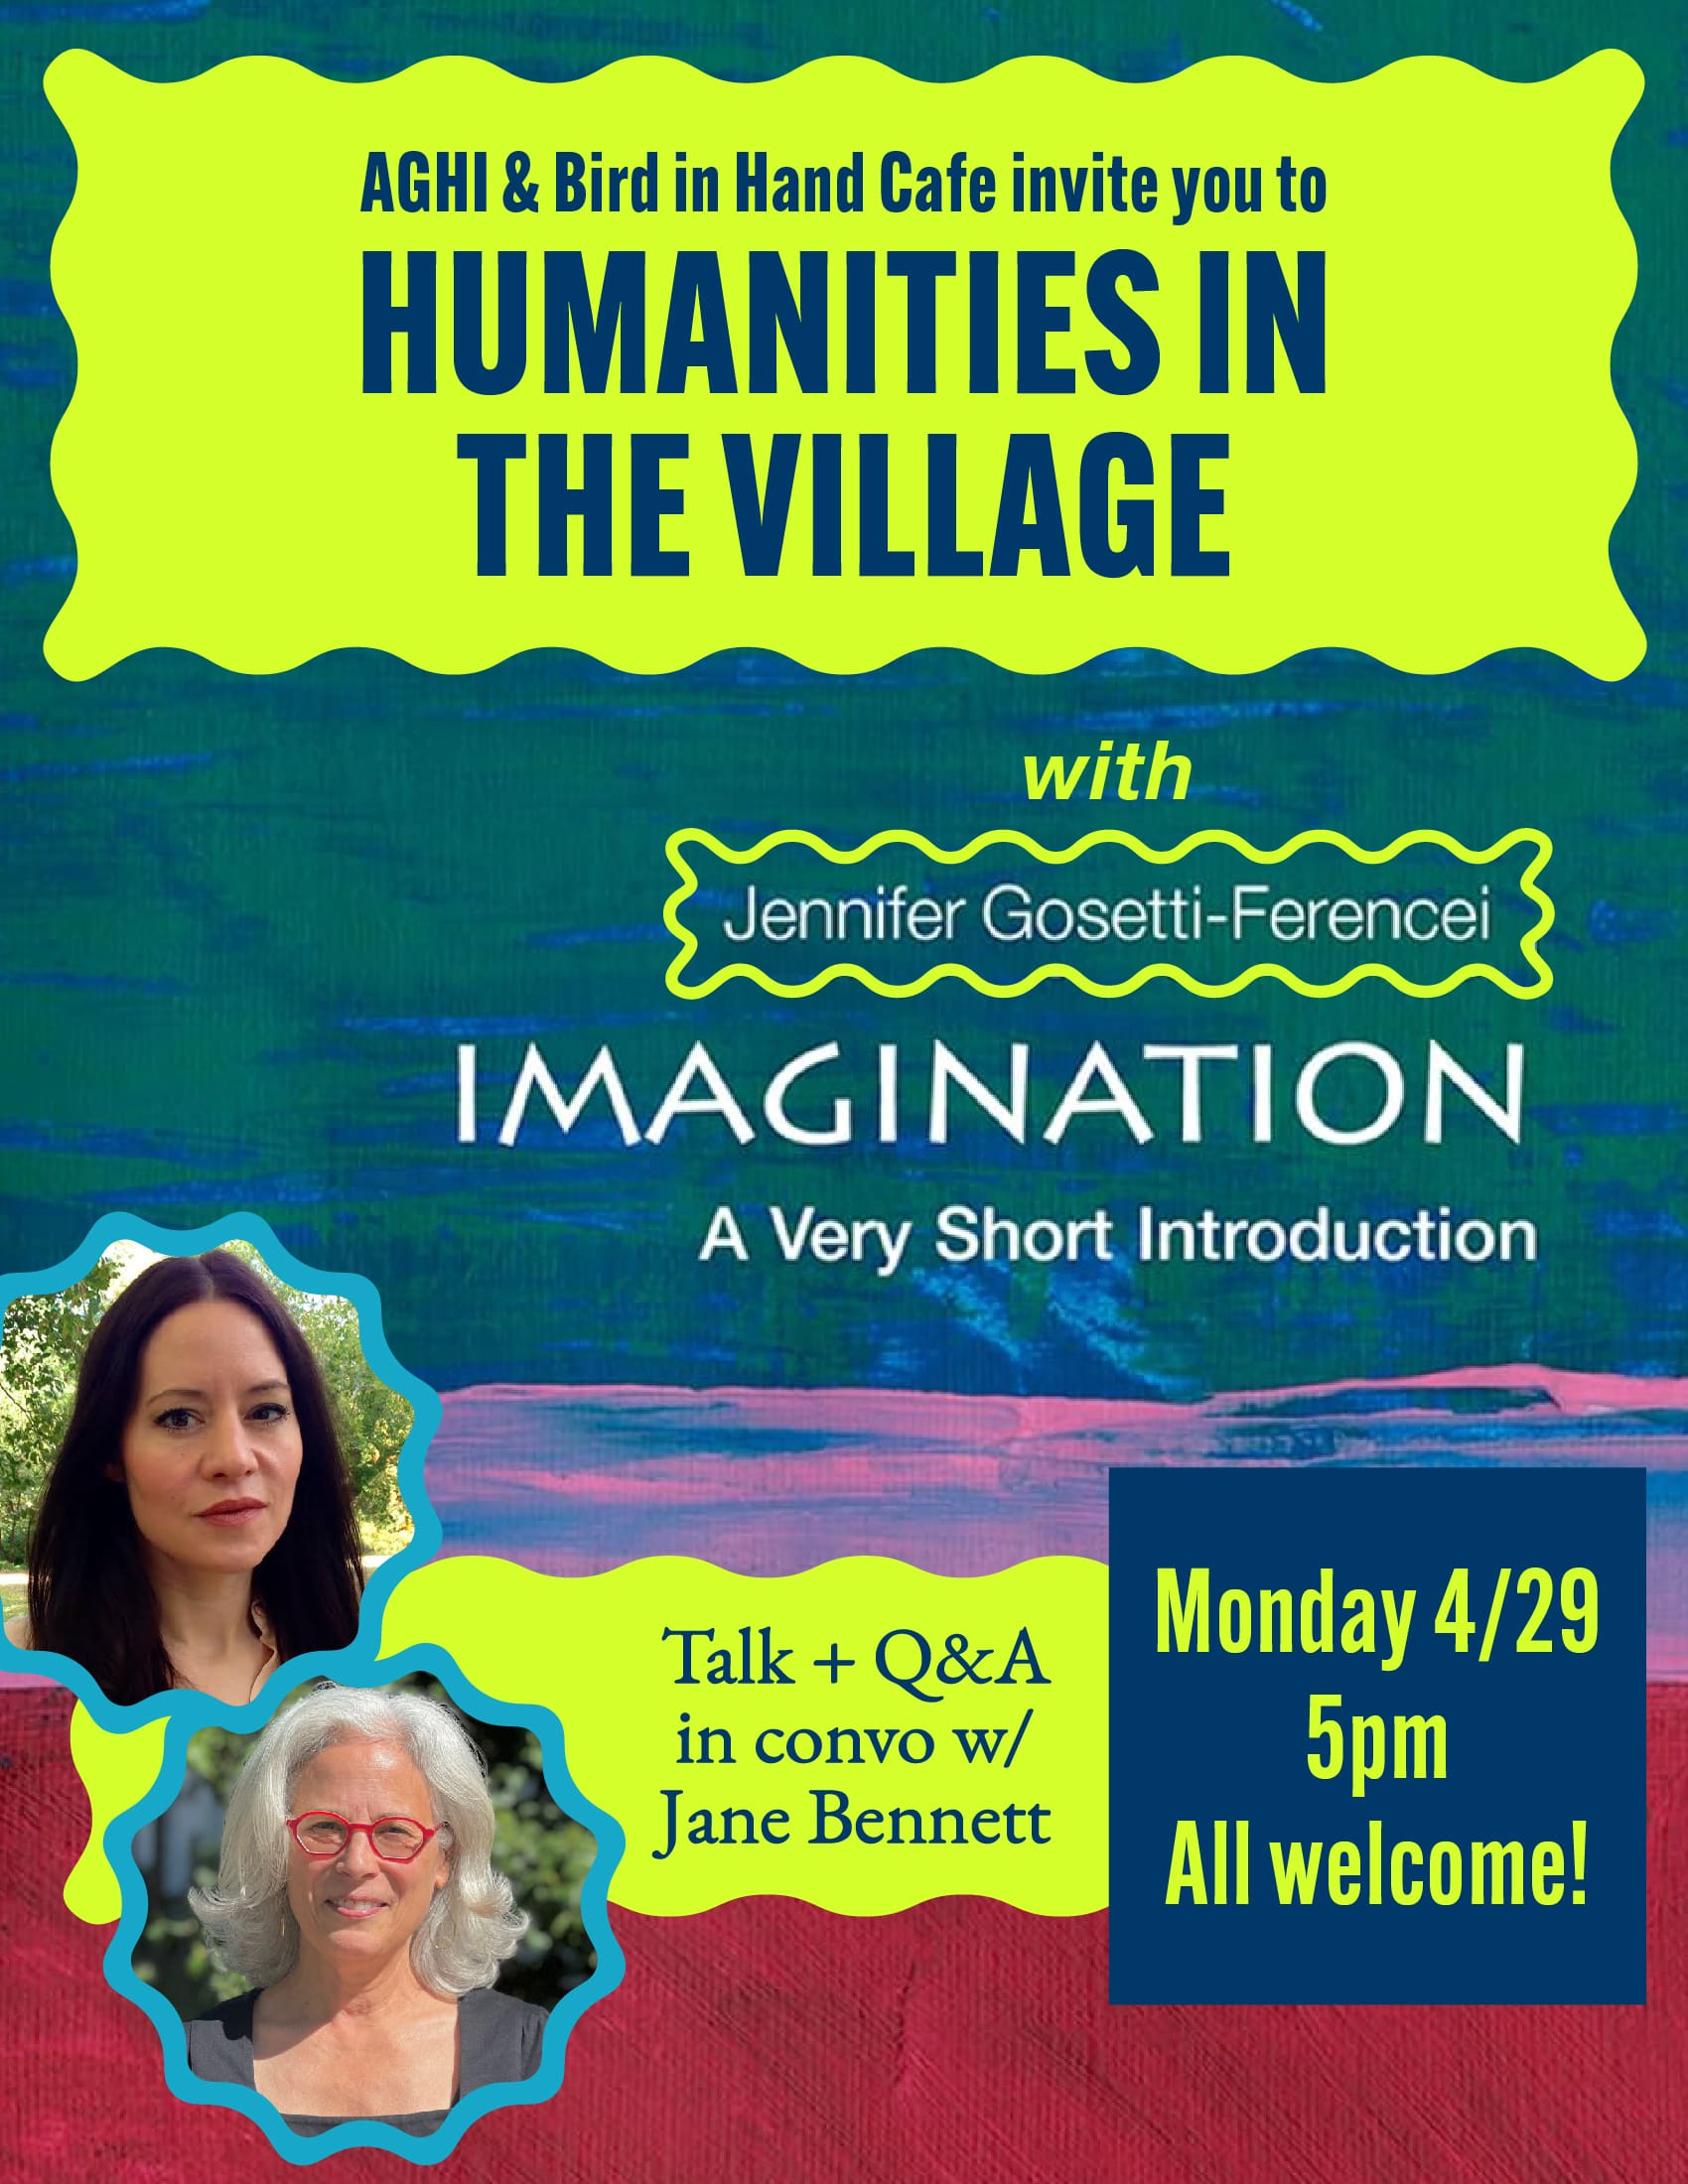 Poster for Humanities in the Village on April 29, featuring author Jennifer Gosetti-Ferencei and Jane Bennett (whose headshots appear on this poster against an abstract backdrop).